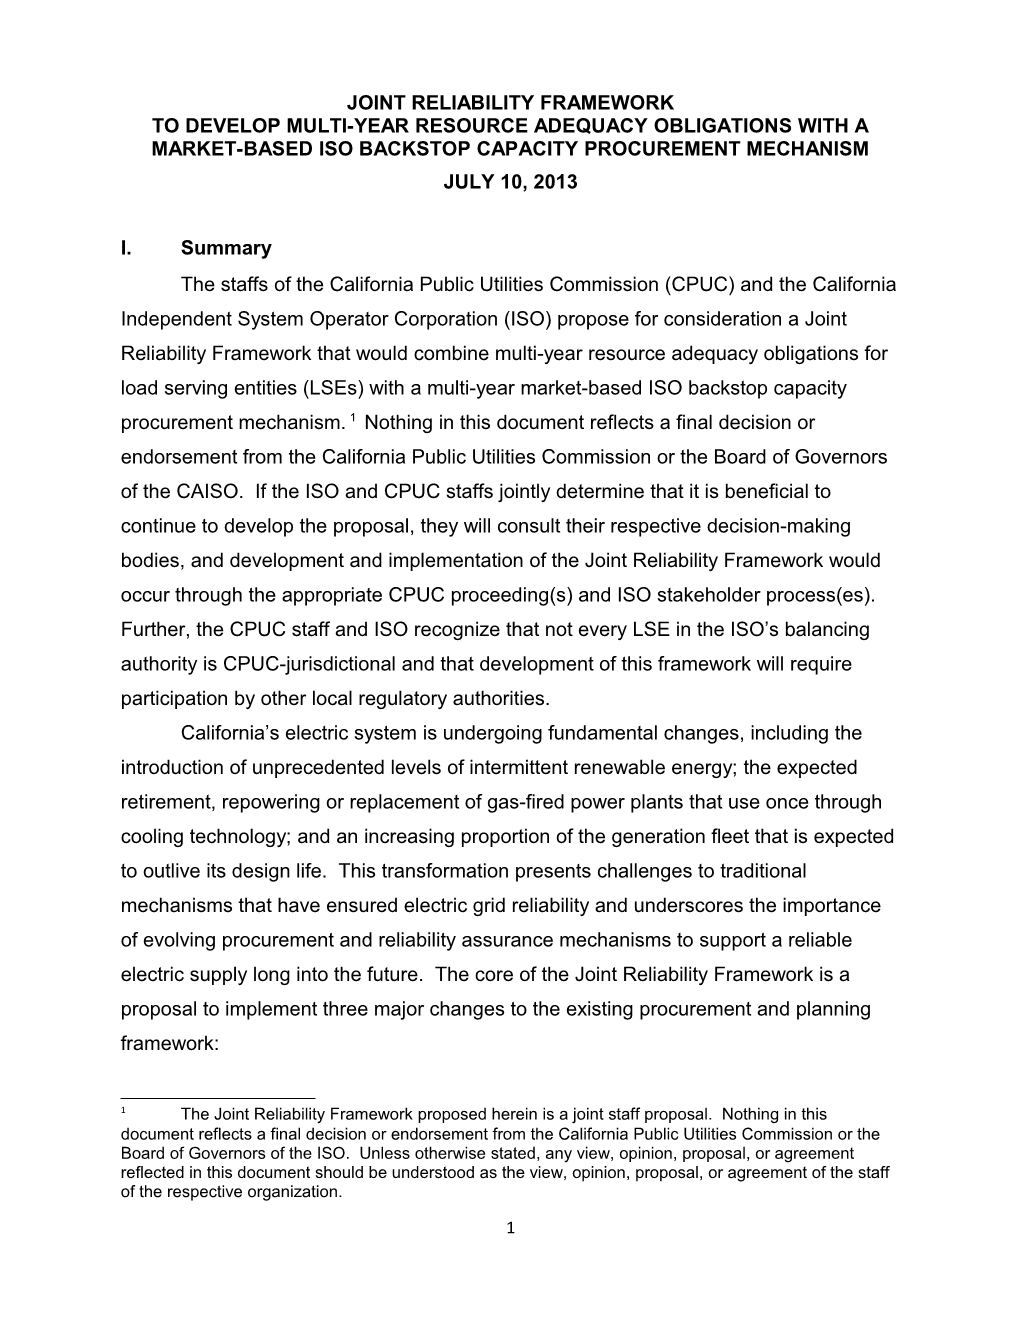 Joint RELIABILITY FRAMEWORK to DEVELOP Multi-Year Resource Adequacy OBLIGATIONS with A